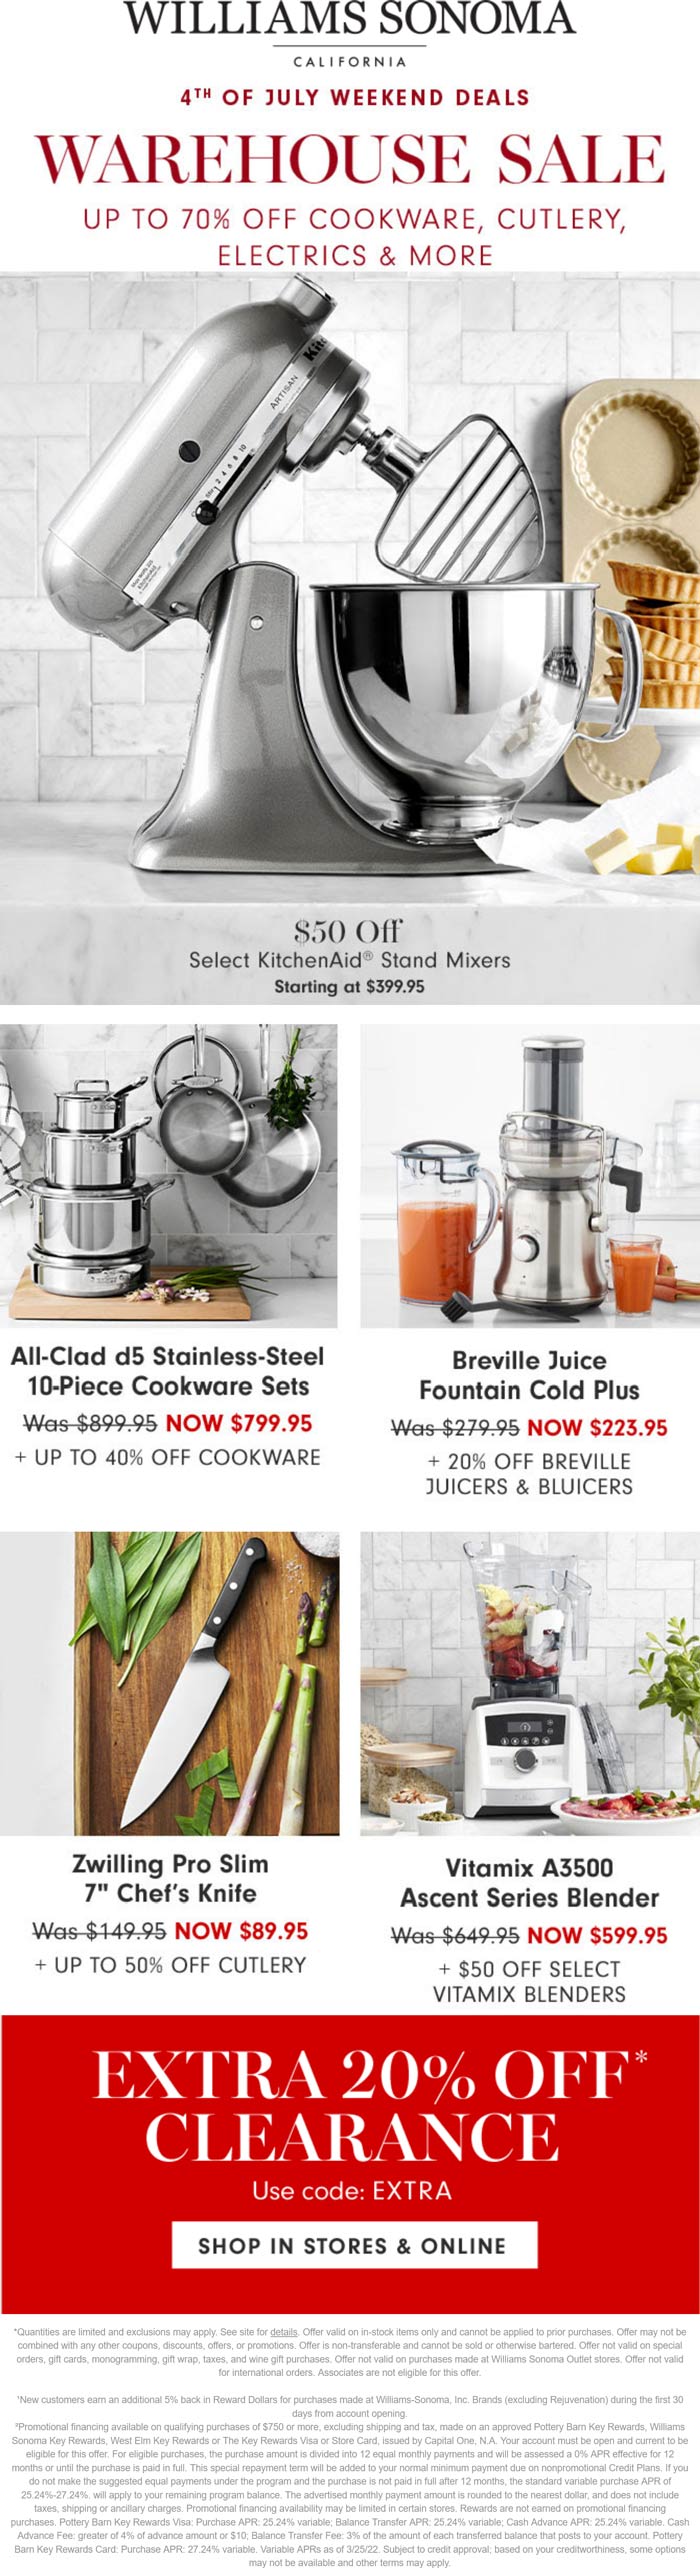 Williams Sonoma stores Coupon  Extra 20% off clearance & more at Williams Sonoma, or online via promo code EXTRA #williamssonoma 